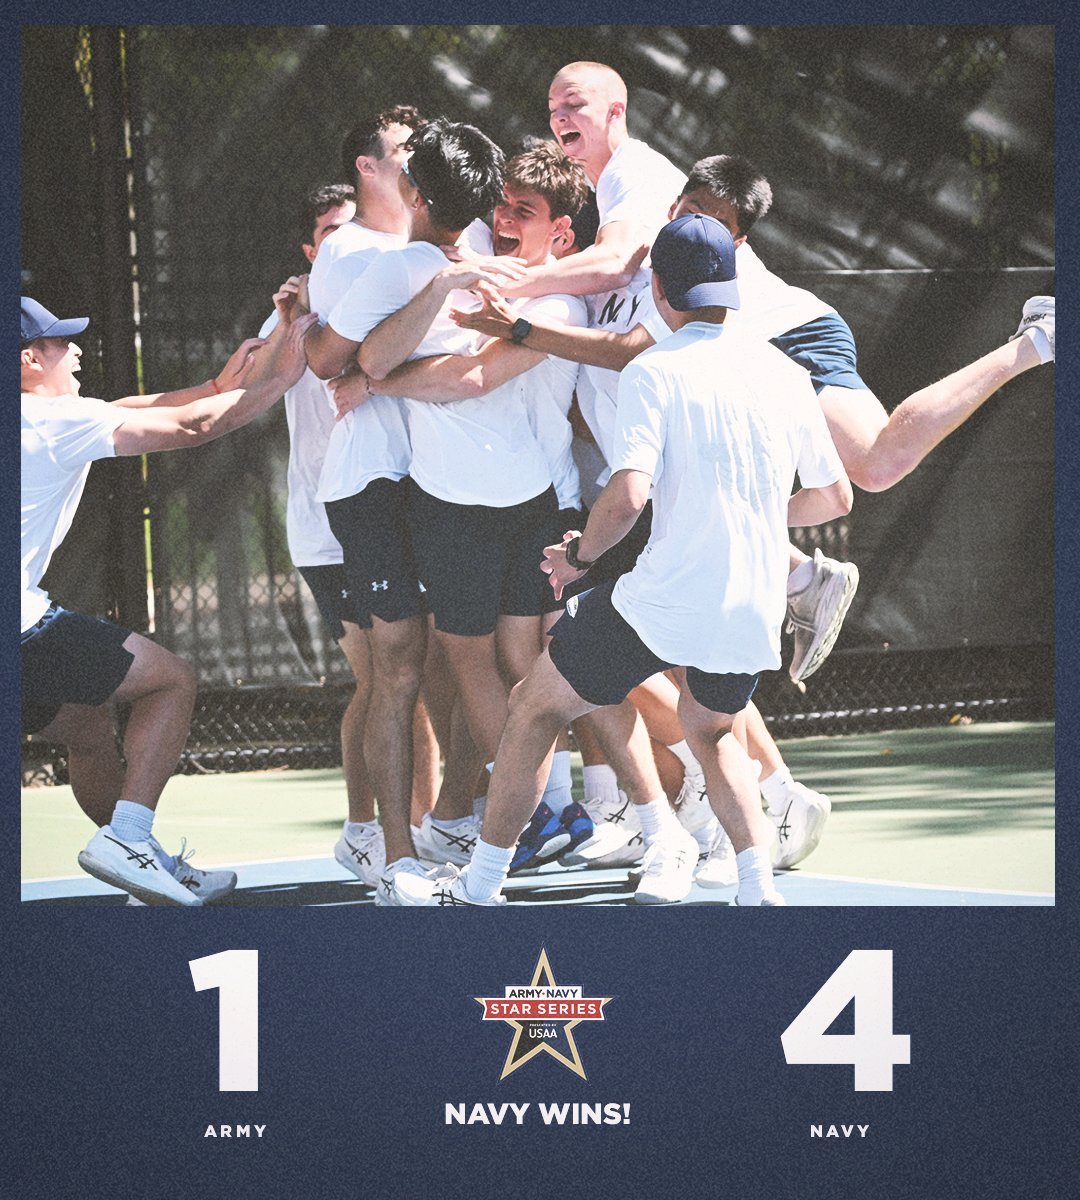 .@NavyMensTennis captures the ⭐️ on the courts in Annapolis 👏👏👏 #ArmyNavy